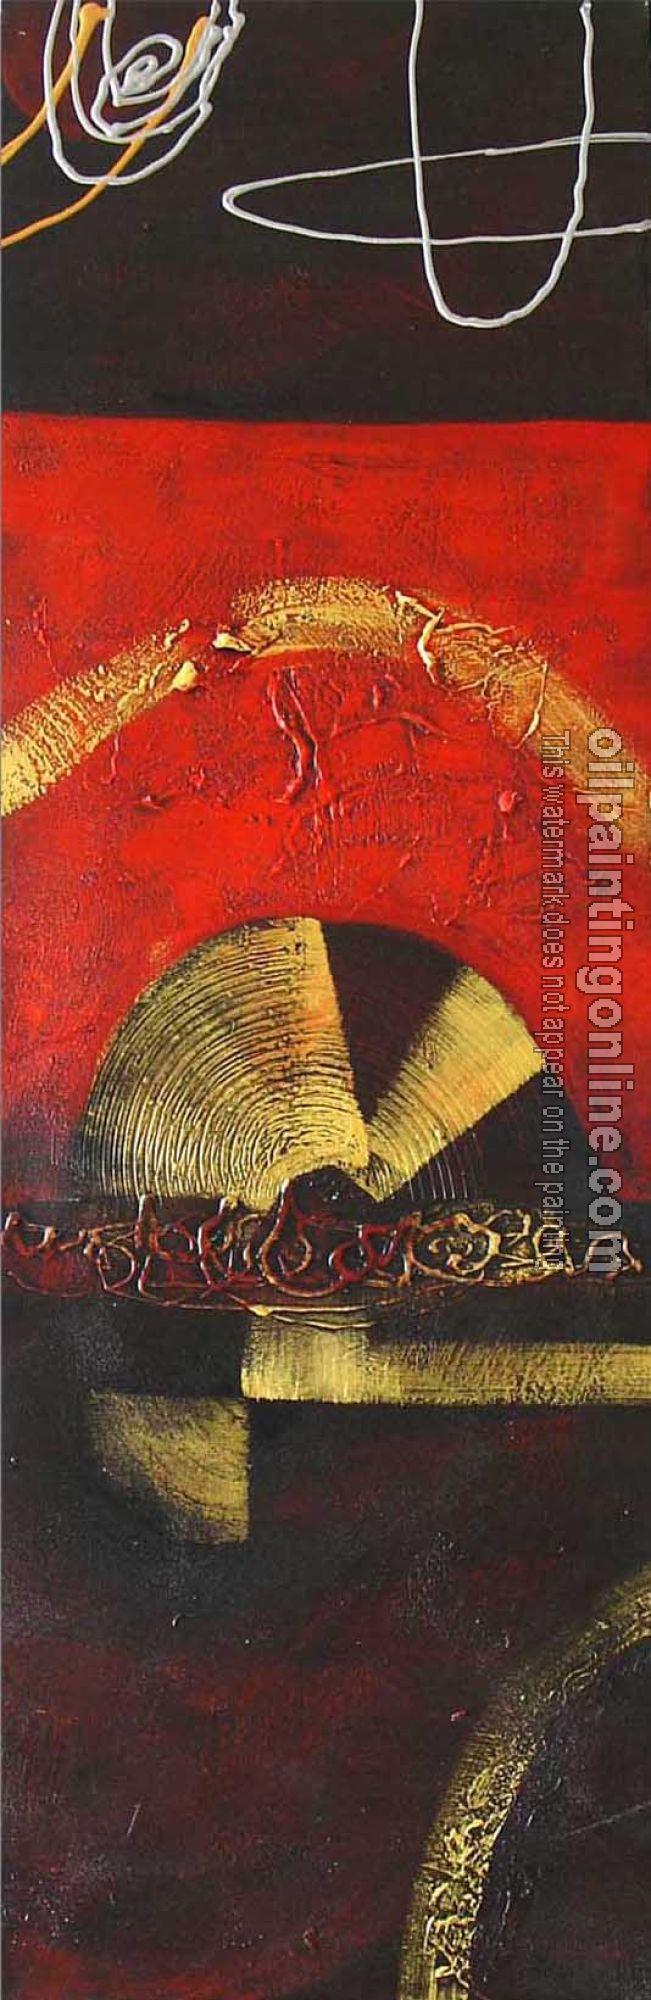 Oil Painting Reproduction - Decorative painting